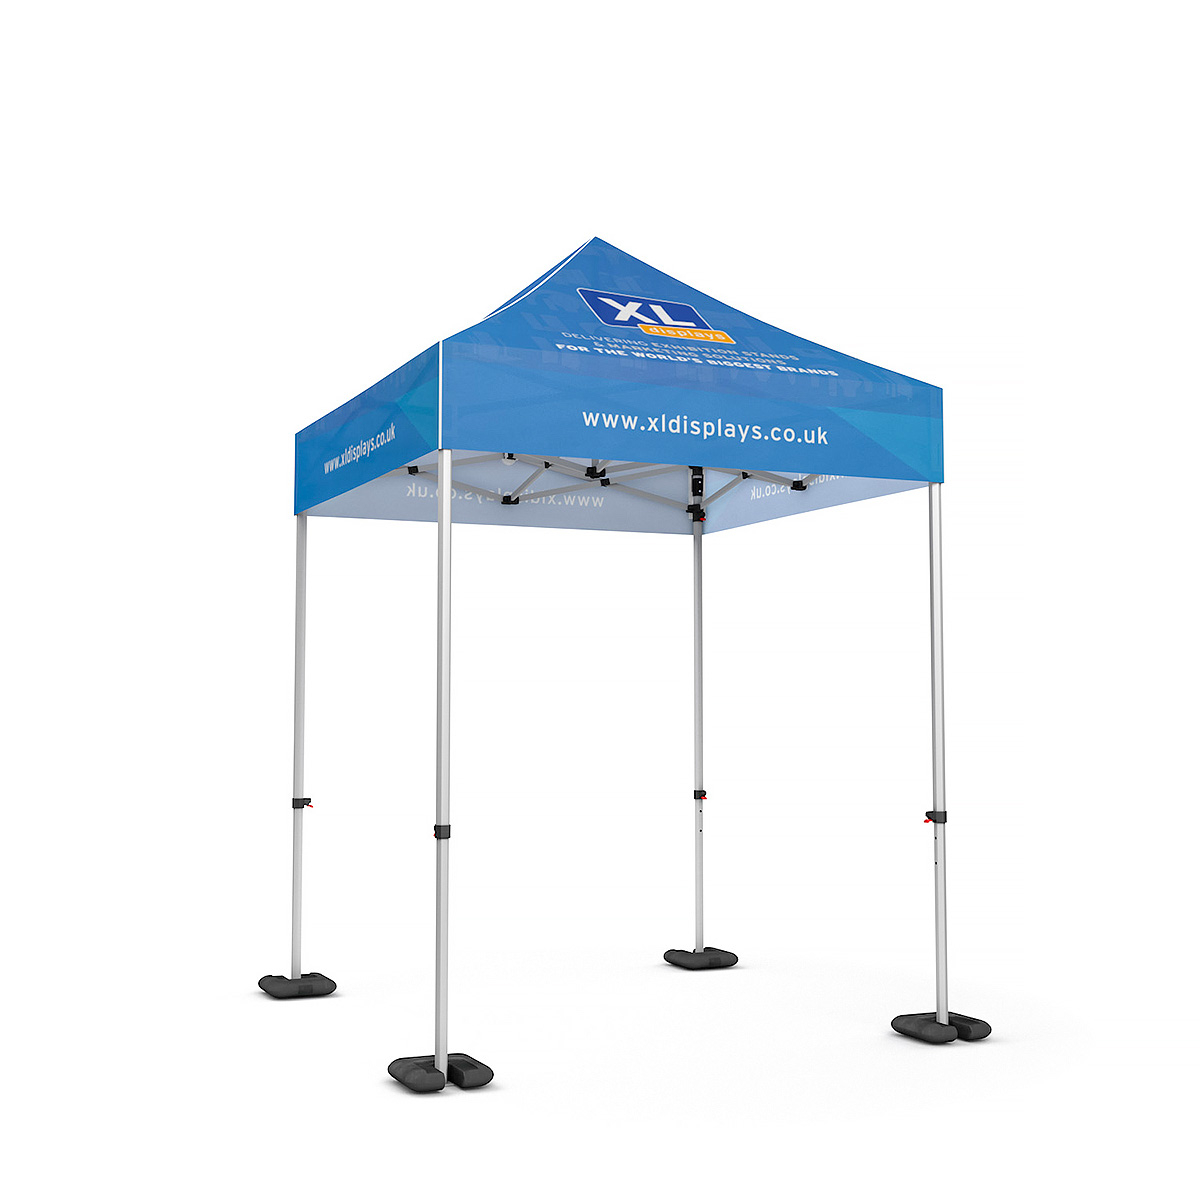 RHINO® 2x2 Promotional Tent Gazebo With 4x Gazebo Weights (Recommended)